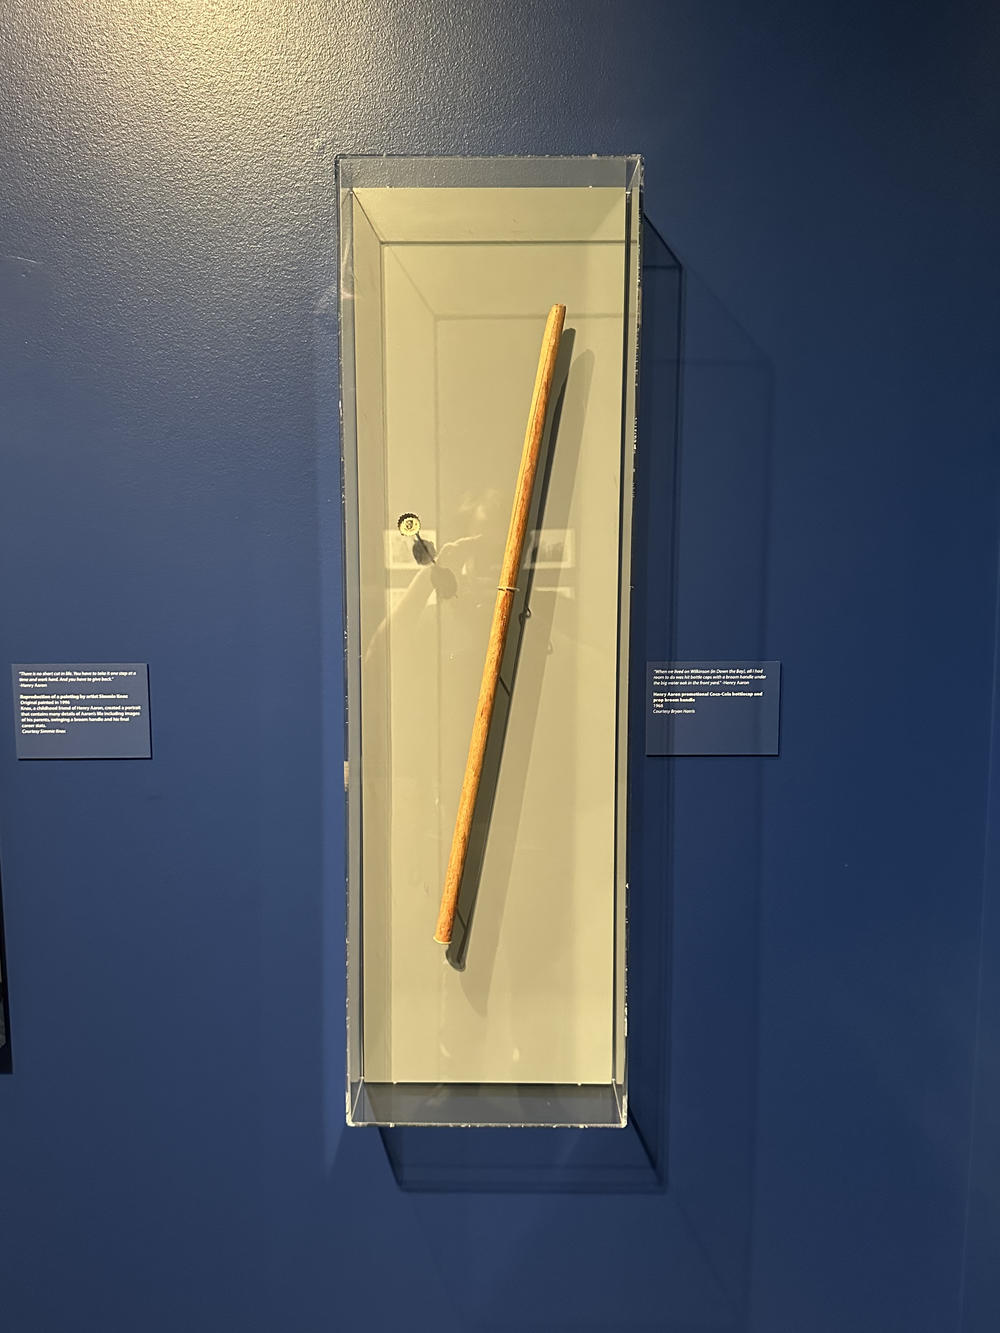 A stick and bottle cap is displayed at the Atlanta History Center's "More Than Brave" exhibit. These items represent Hank Aaron's earliest games as a baseball player.